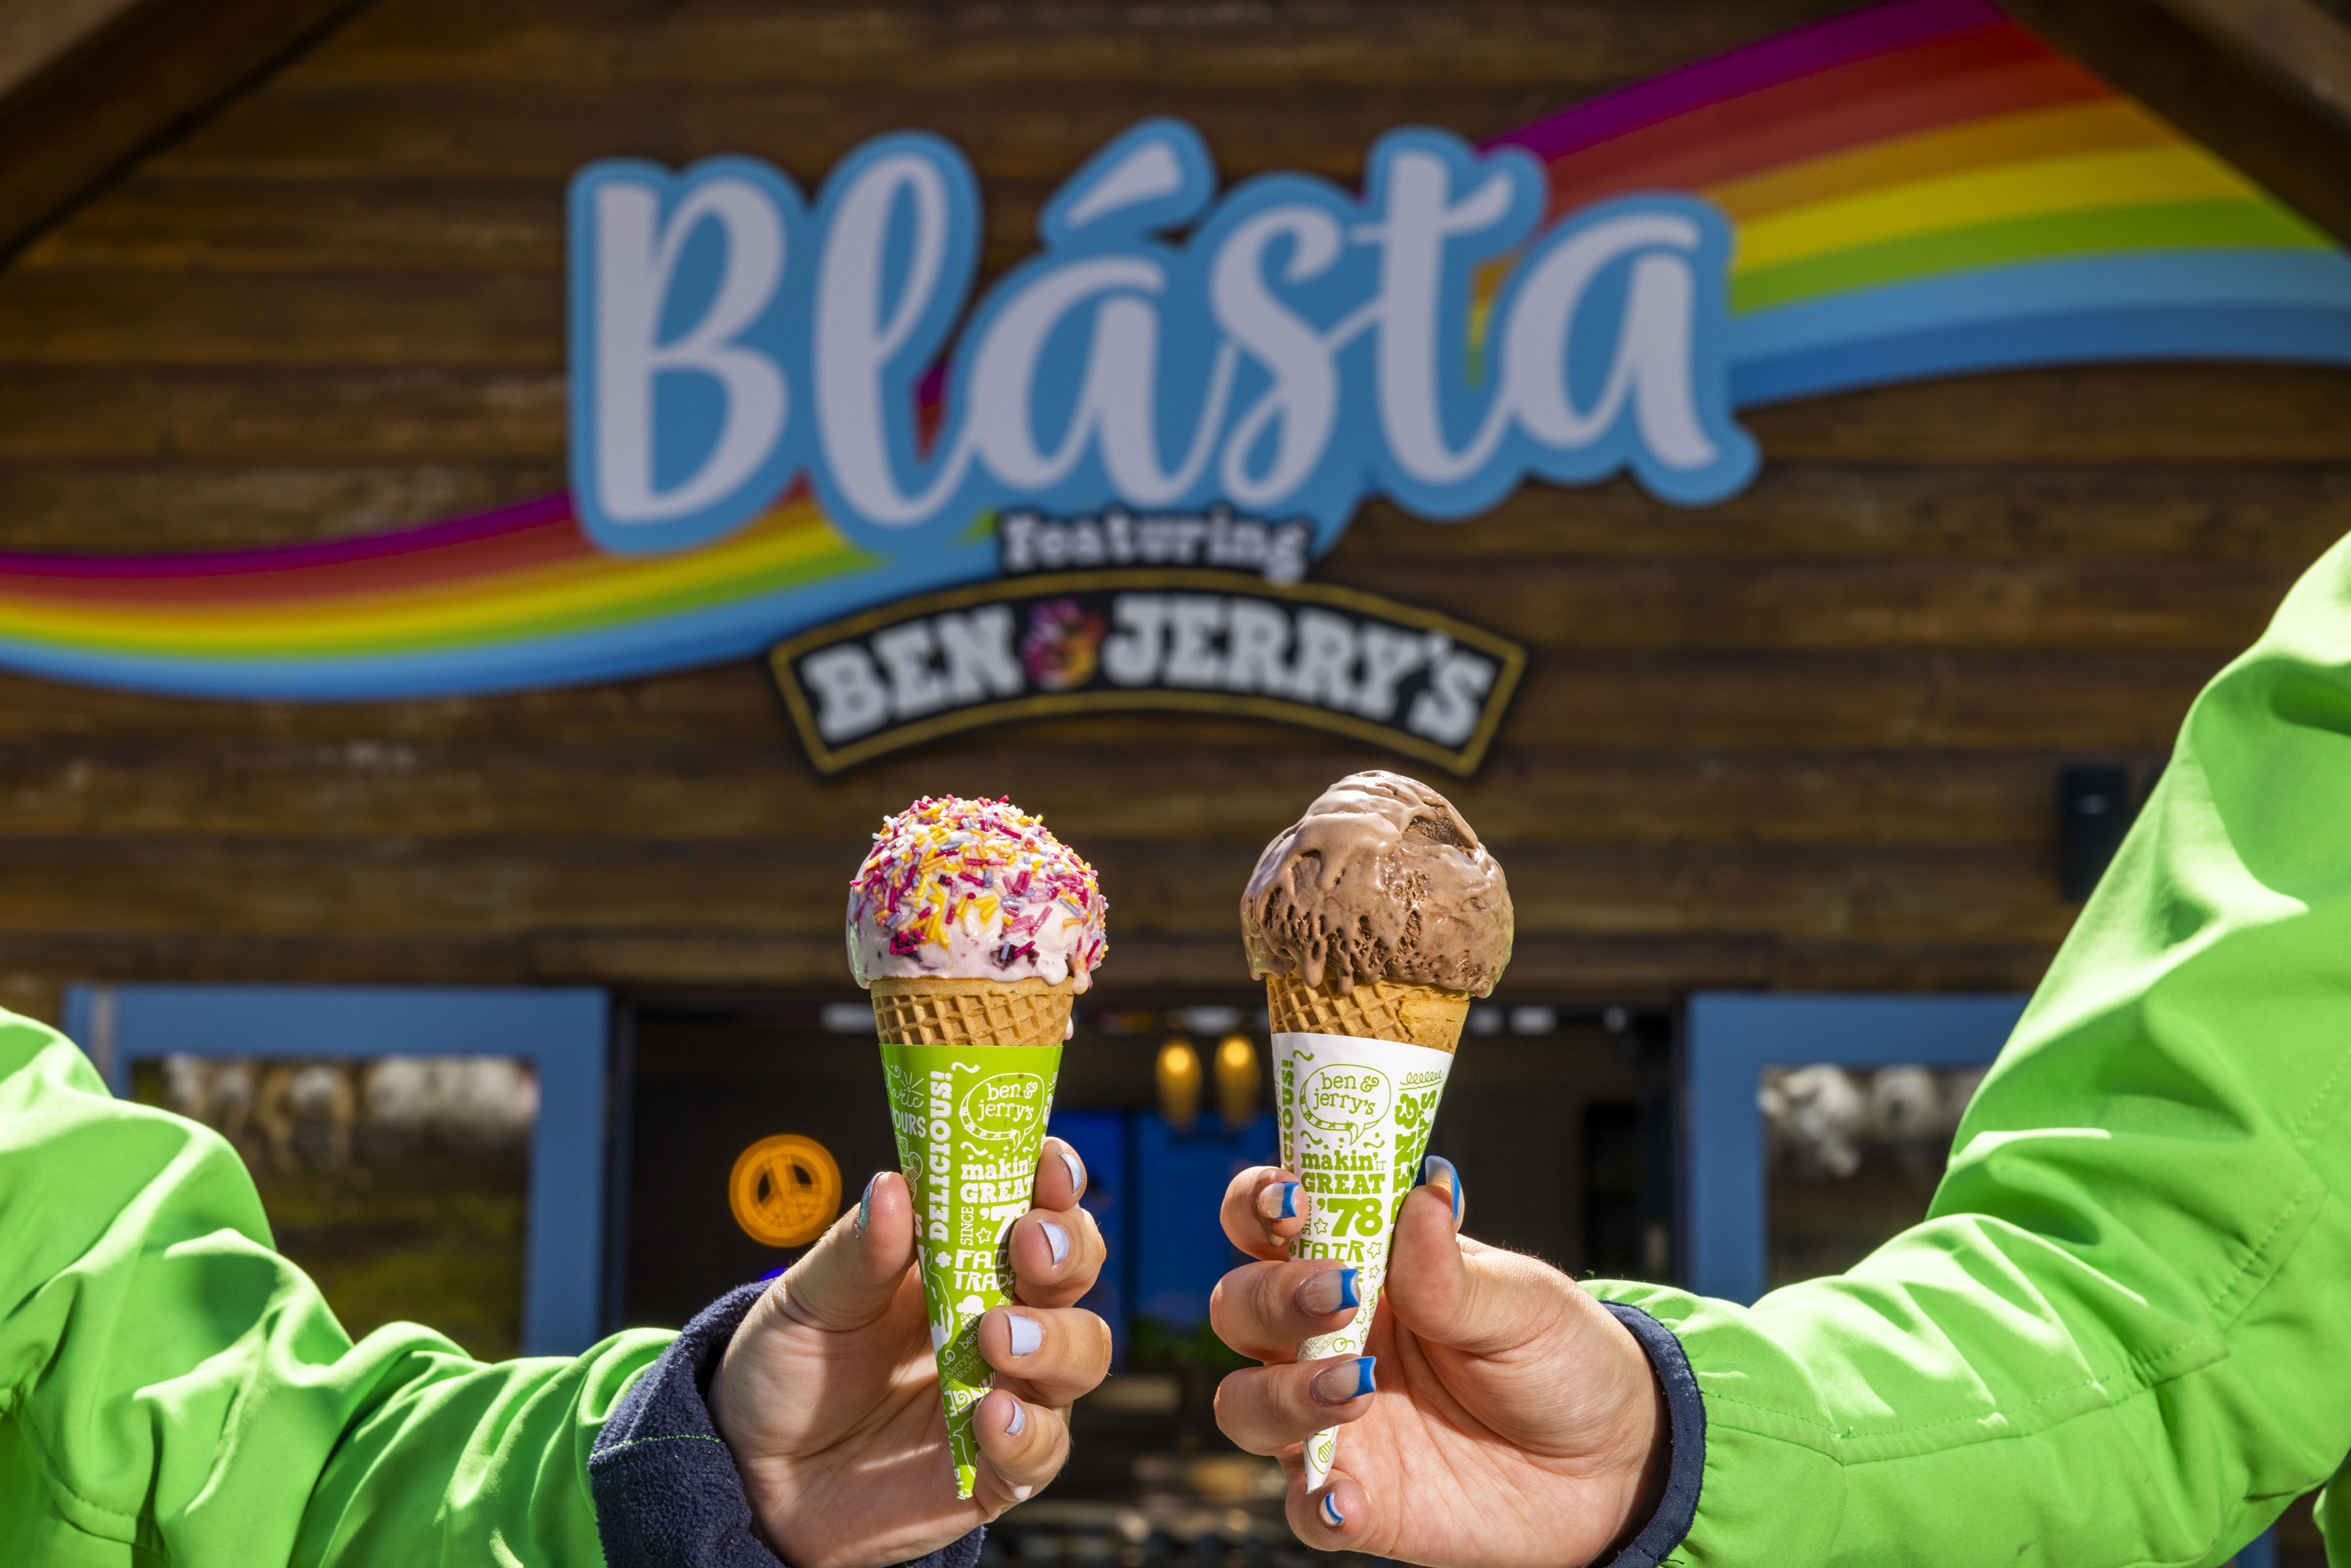 two Ben & Jerry's cones outside an ice cream parlour called Blásta